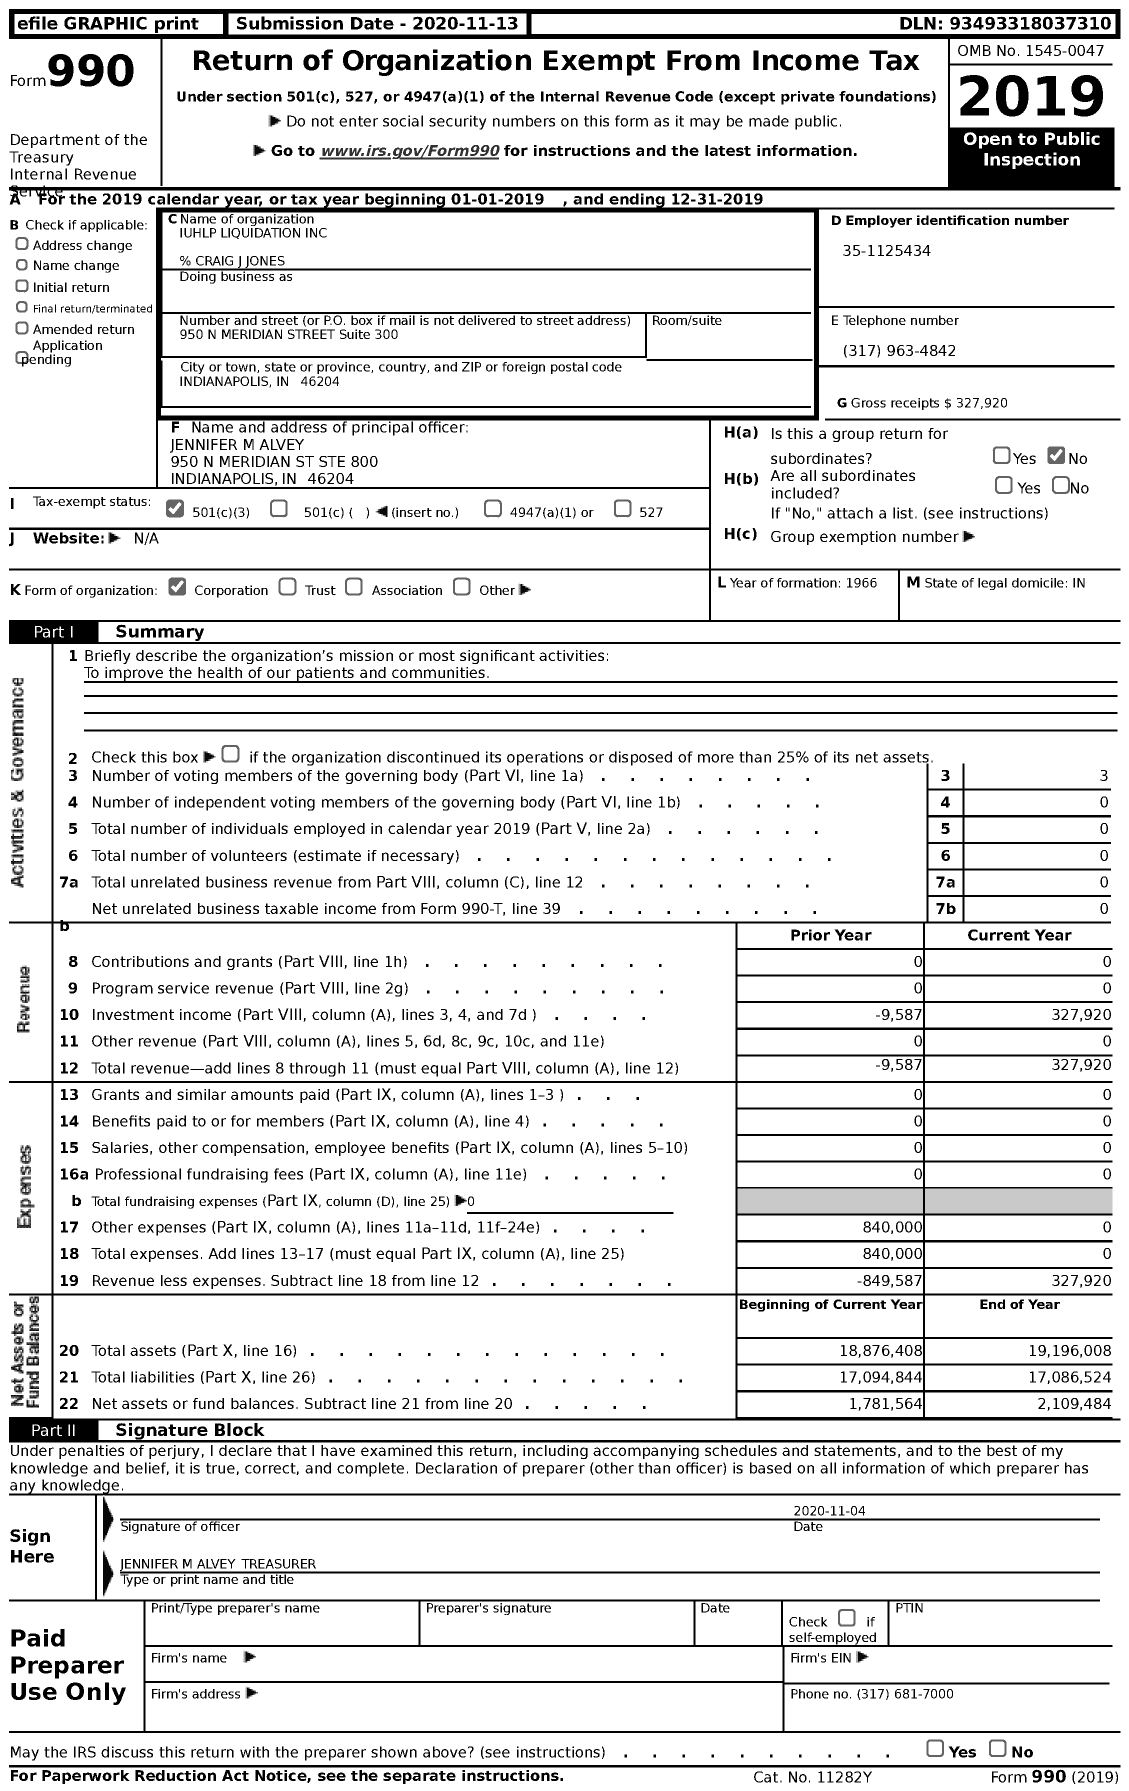 Image of first page of 2019 Form 990 for IUHLP Liquidation